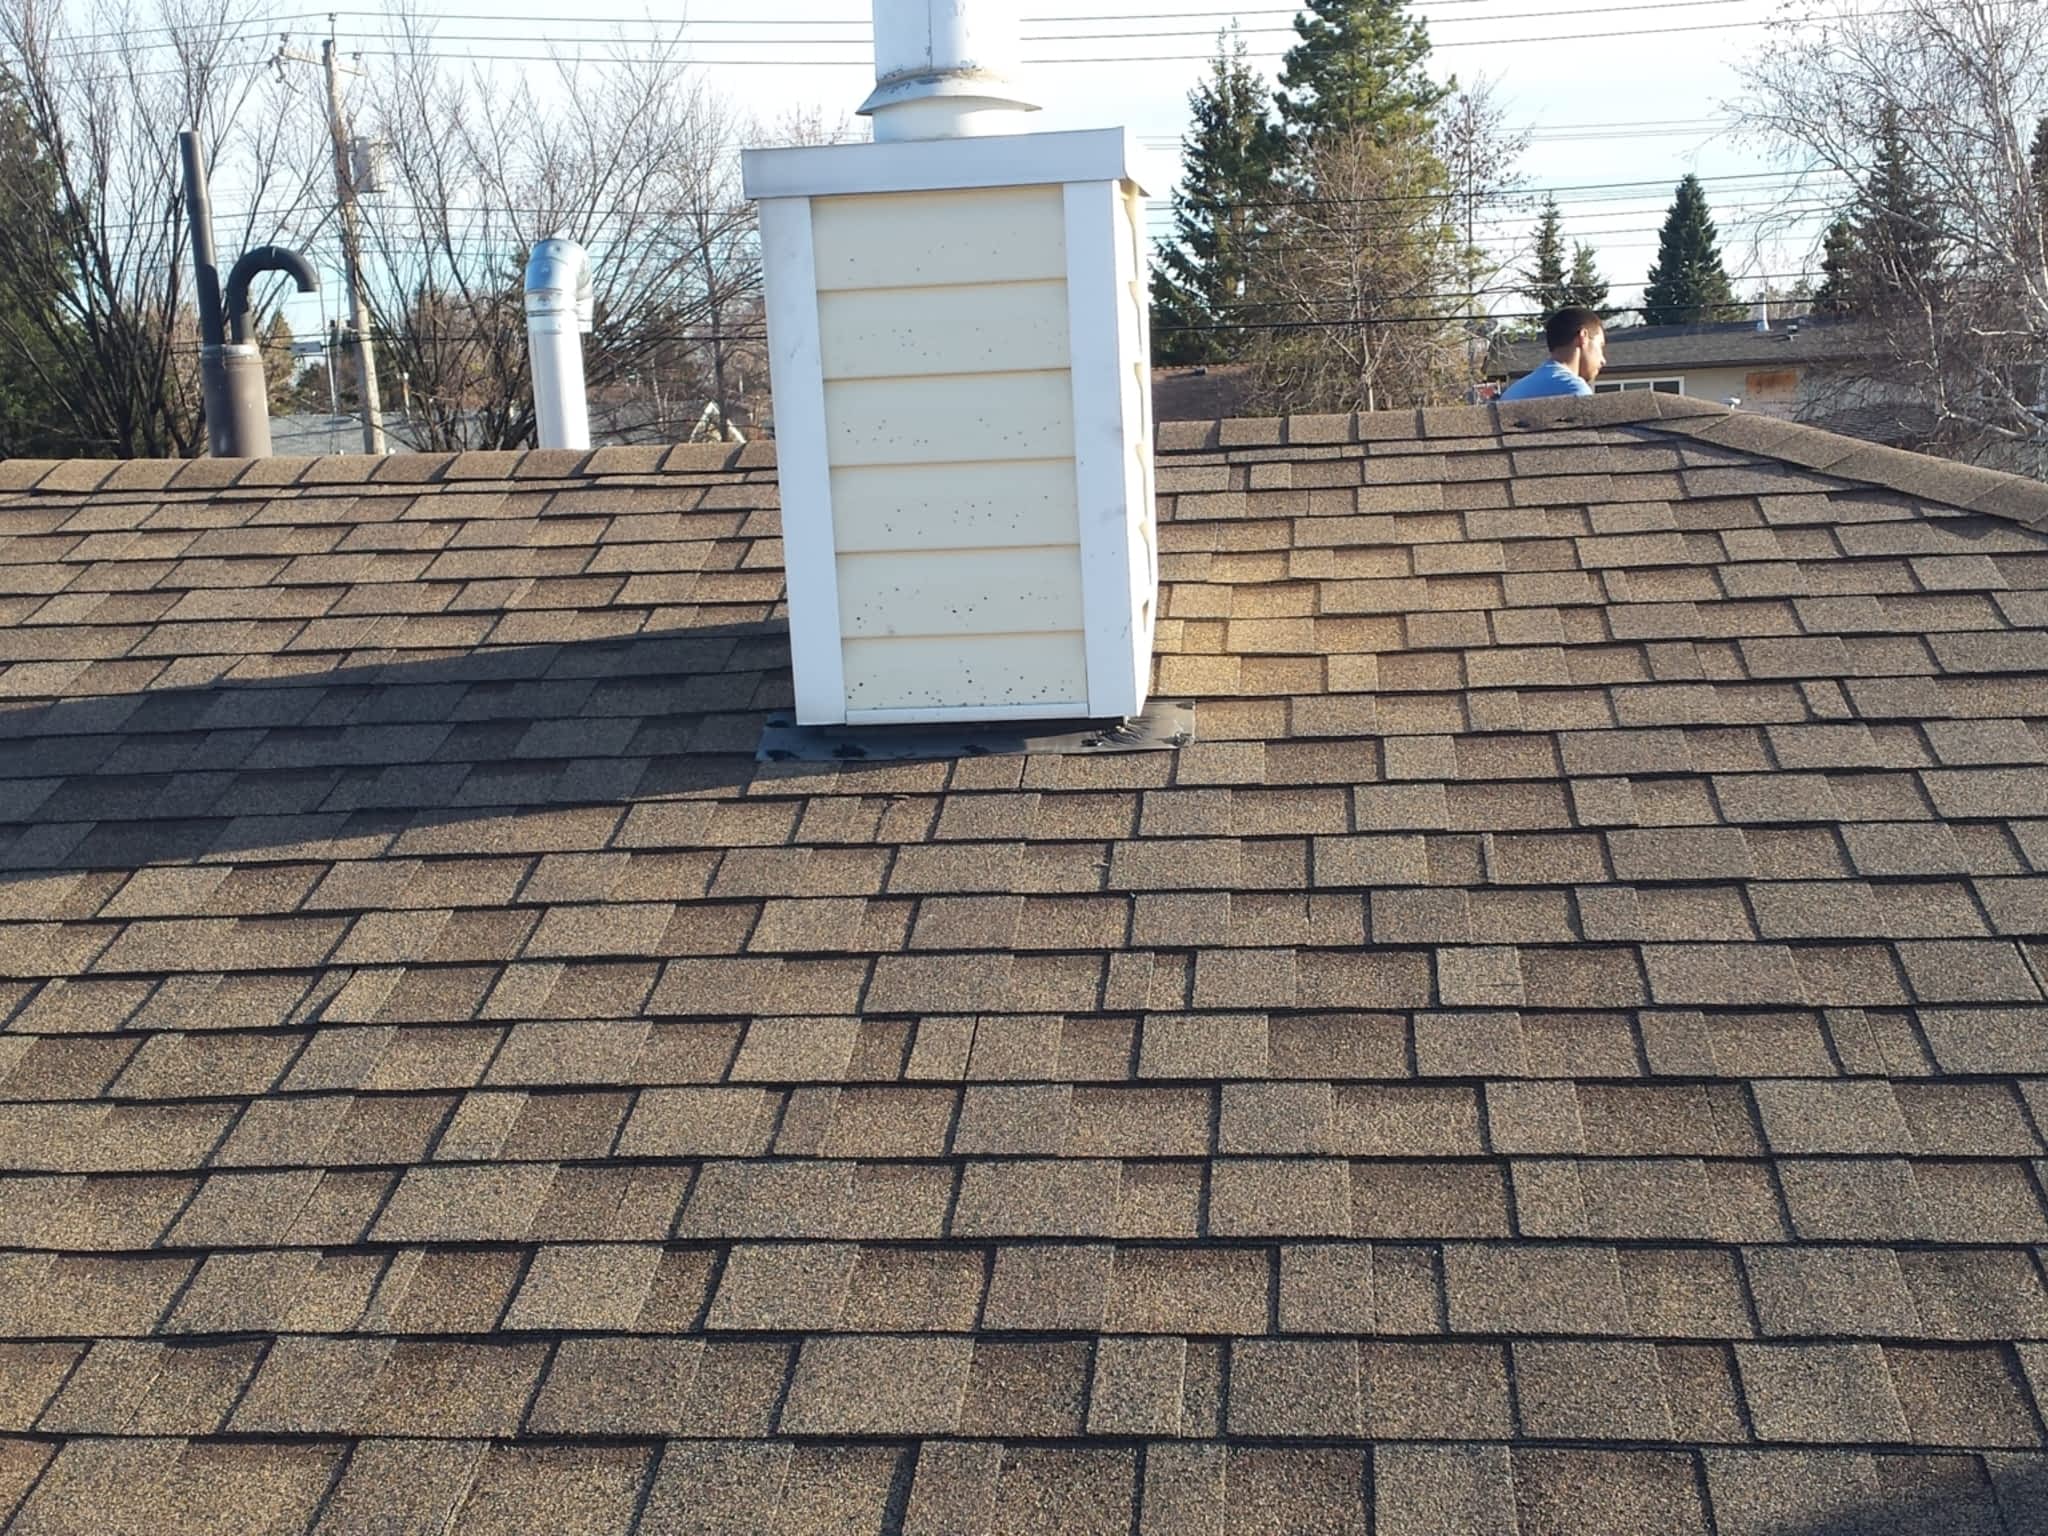 photo Spruce Grove Roofing Ltd